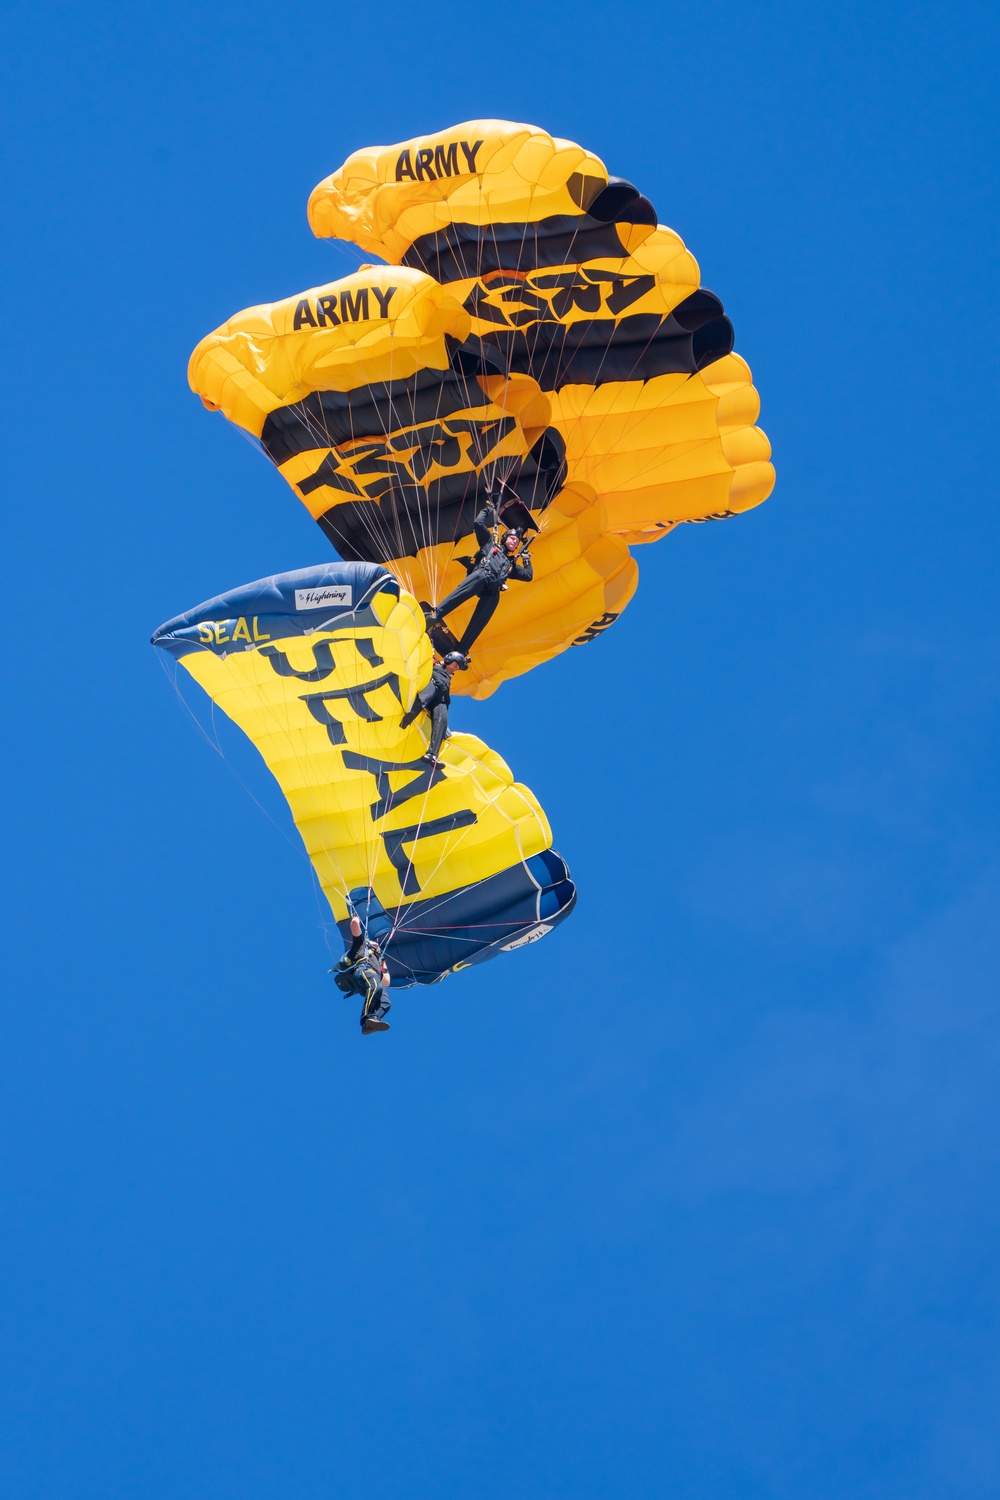 Soldier native to Southern California skydives into Miramar Airshow